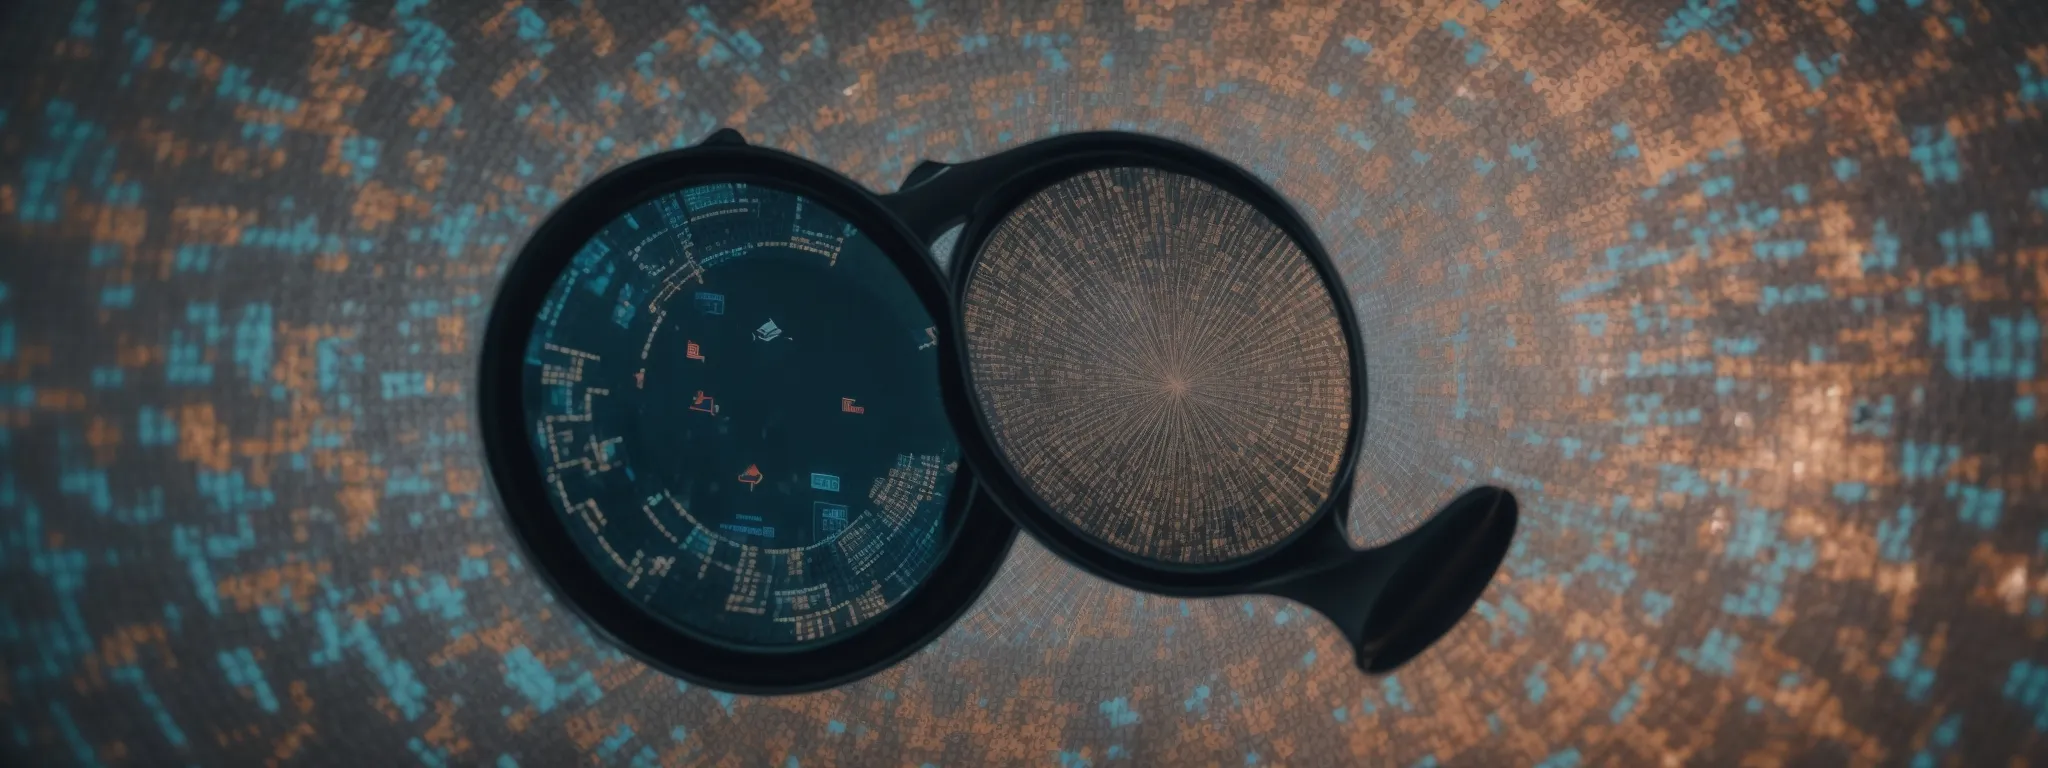 a magnifying glass hovering over a jigsaw puzzle of interconnected digital screens displaying graphs, charts, and social media icons.